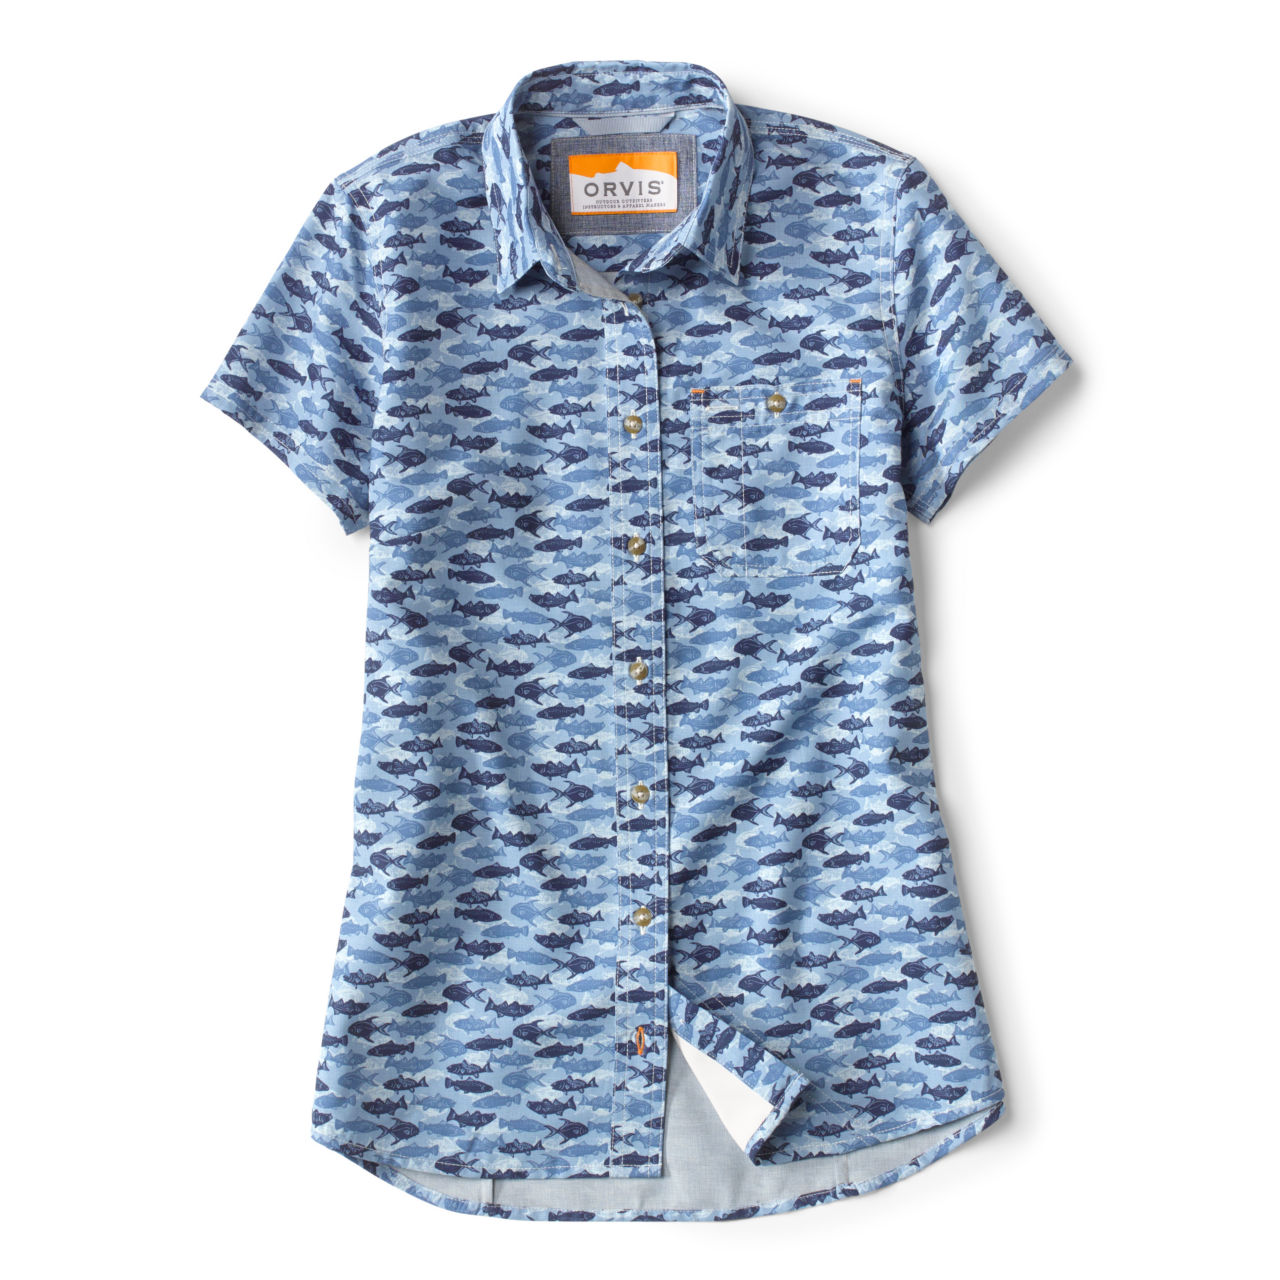 Women’s Tech Chambray Short-Sleeved Work Shirt - DUSTY BLUE FISH BLOCK CAMO image number 0